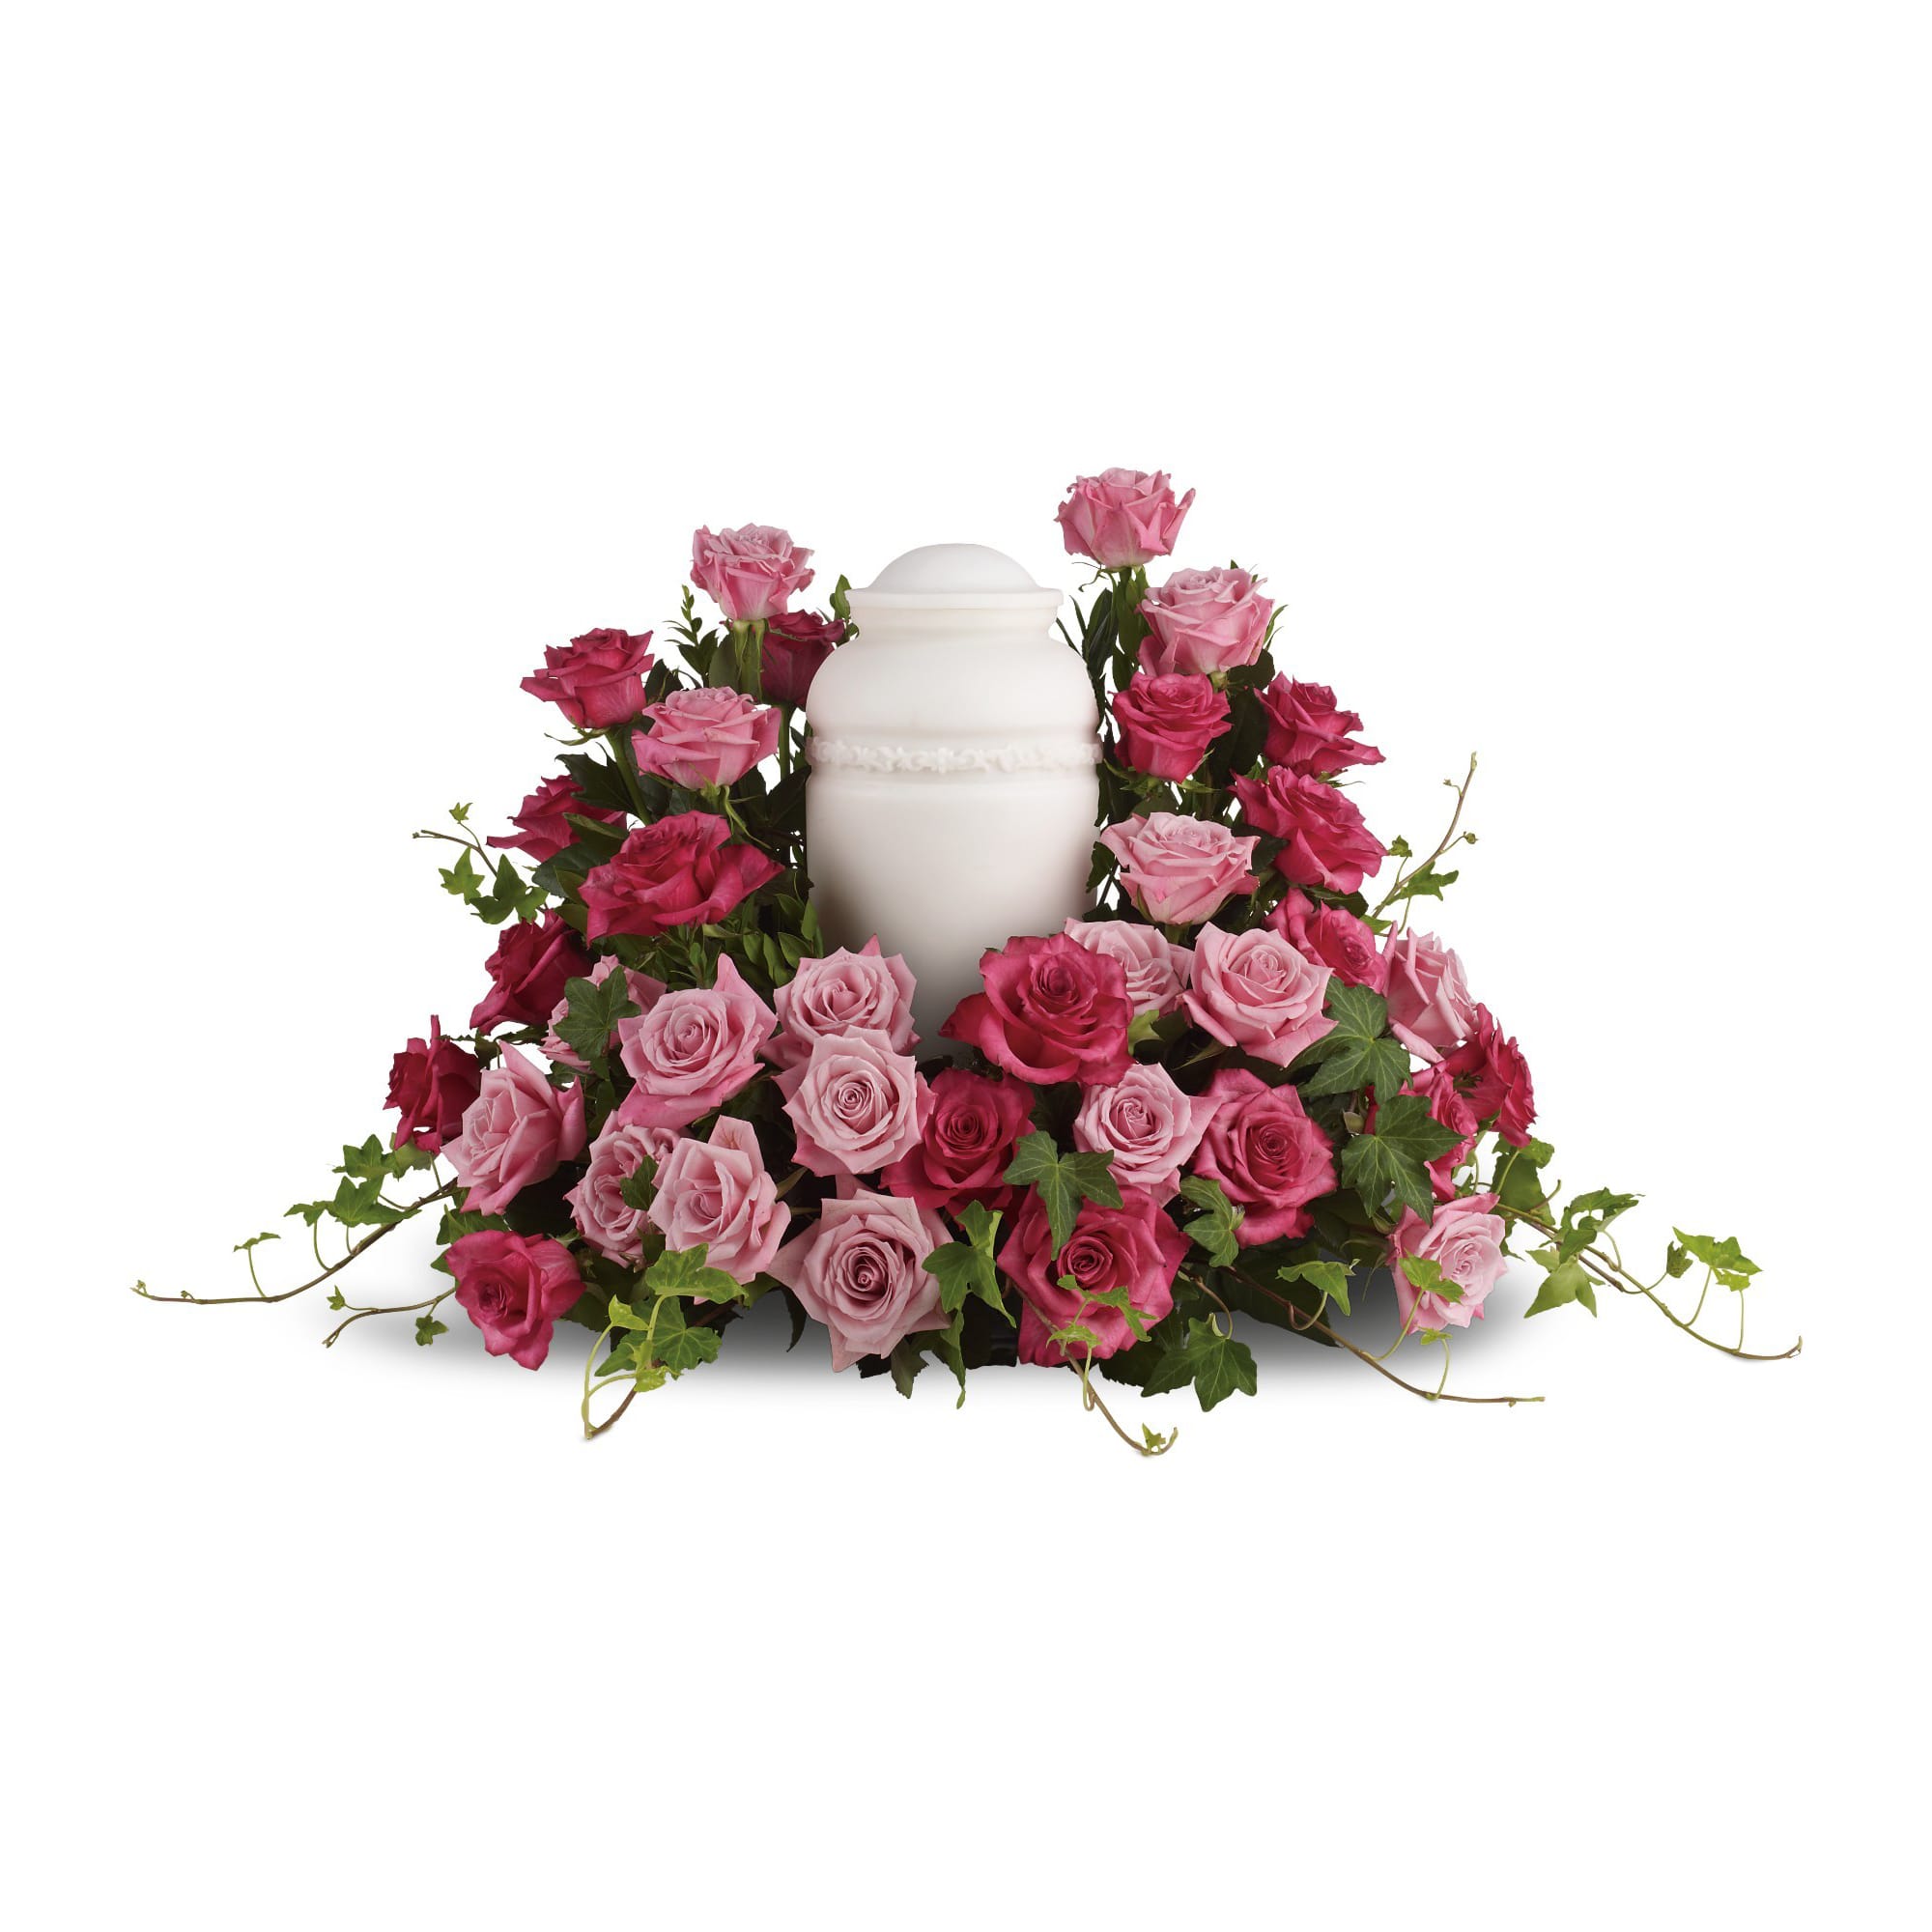 Bed of Pink Roses by Teleflora - A loving embrace. A beautiful gesture. A respectful tribute. A wealth of pink roses create a soft, serene and dignified way to cherish and honor the departed. 